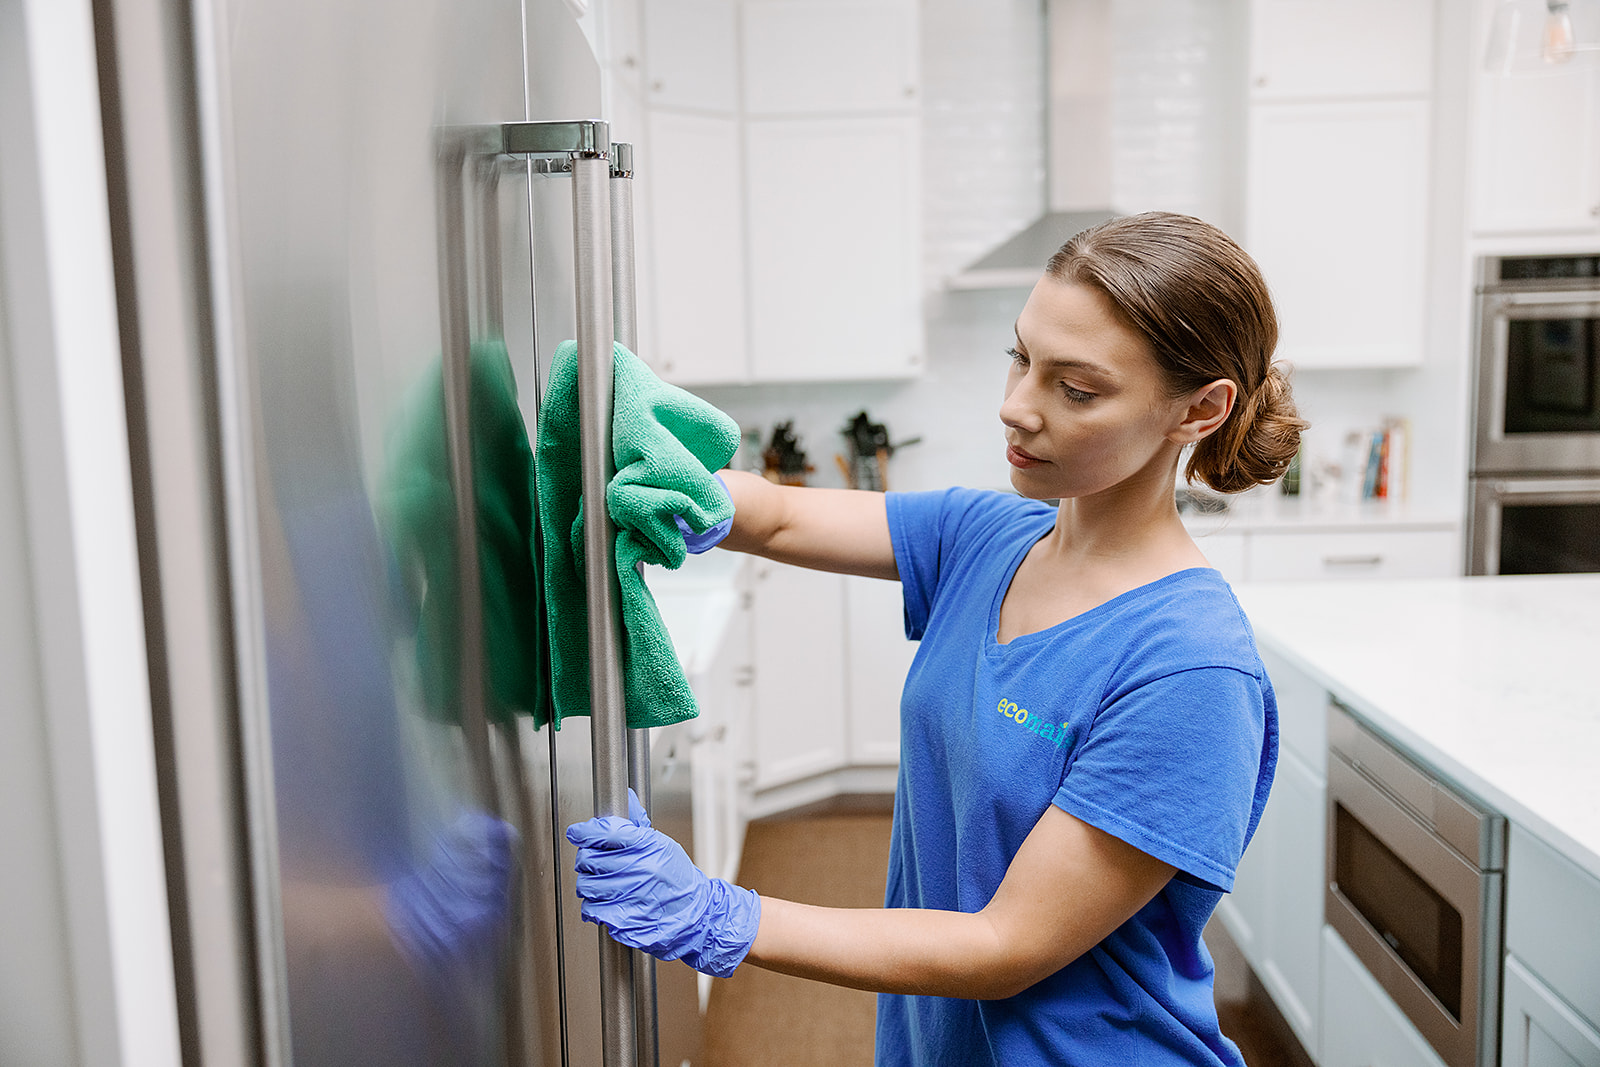 House Cleaning Service in Fort Myers: Steps We Take to Help the Environment